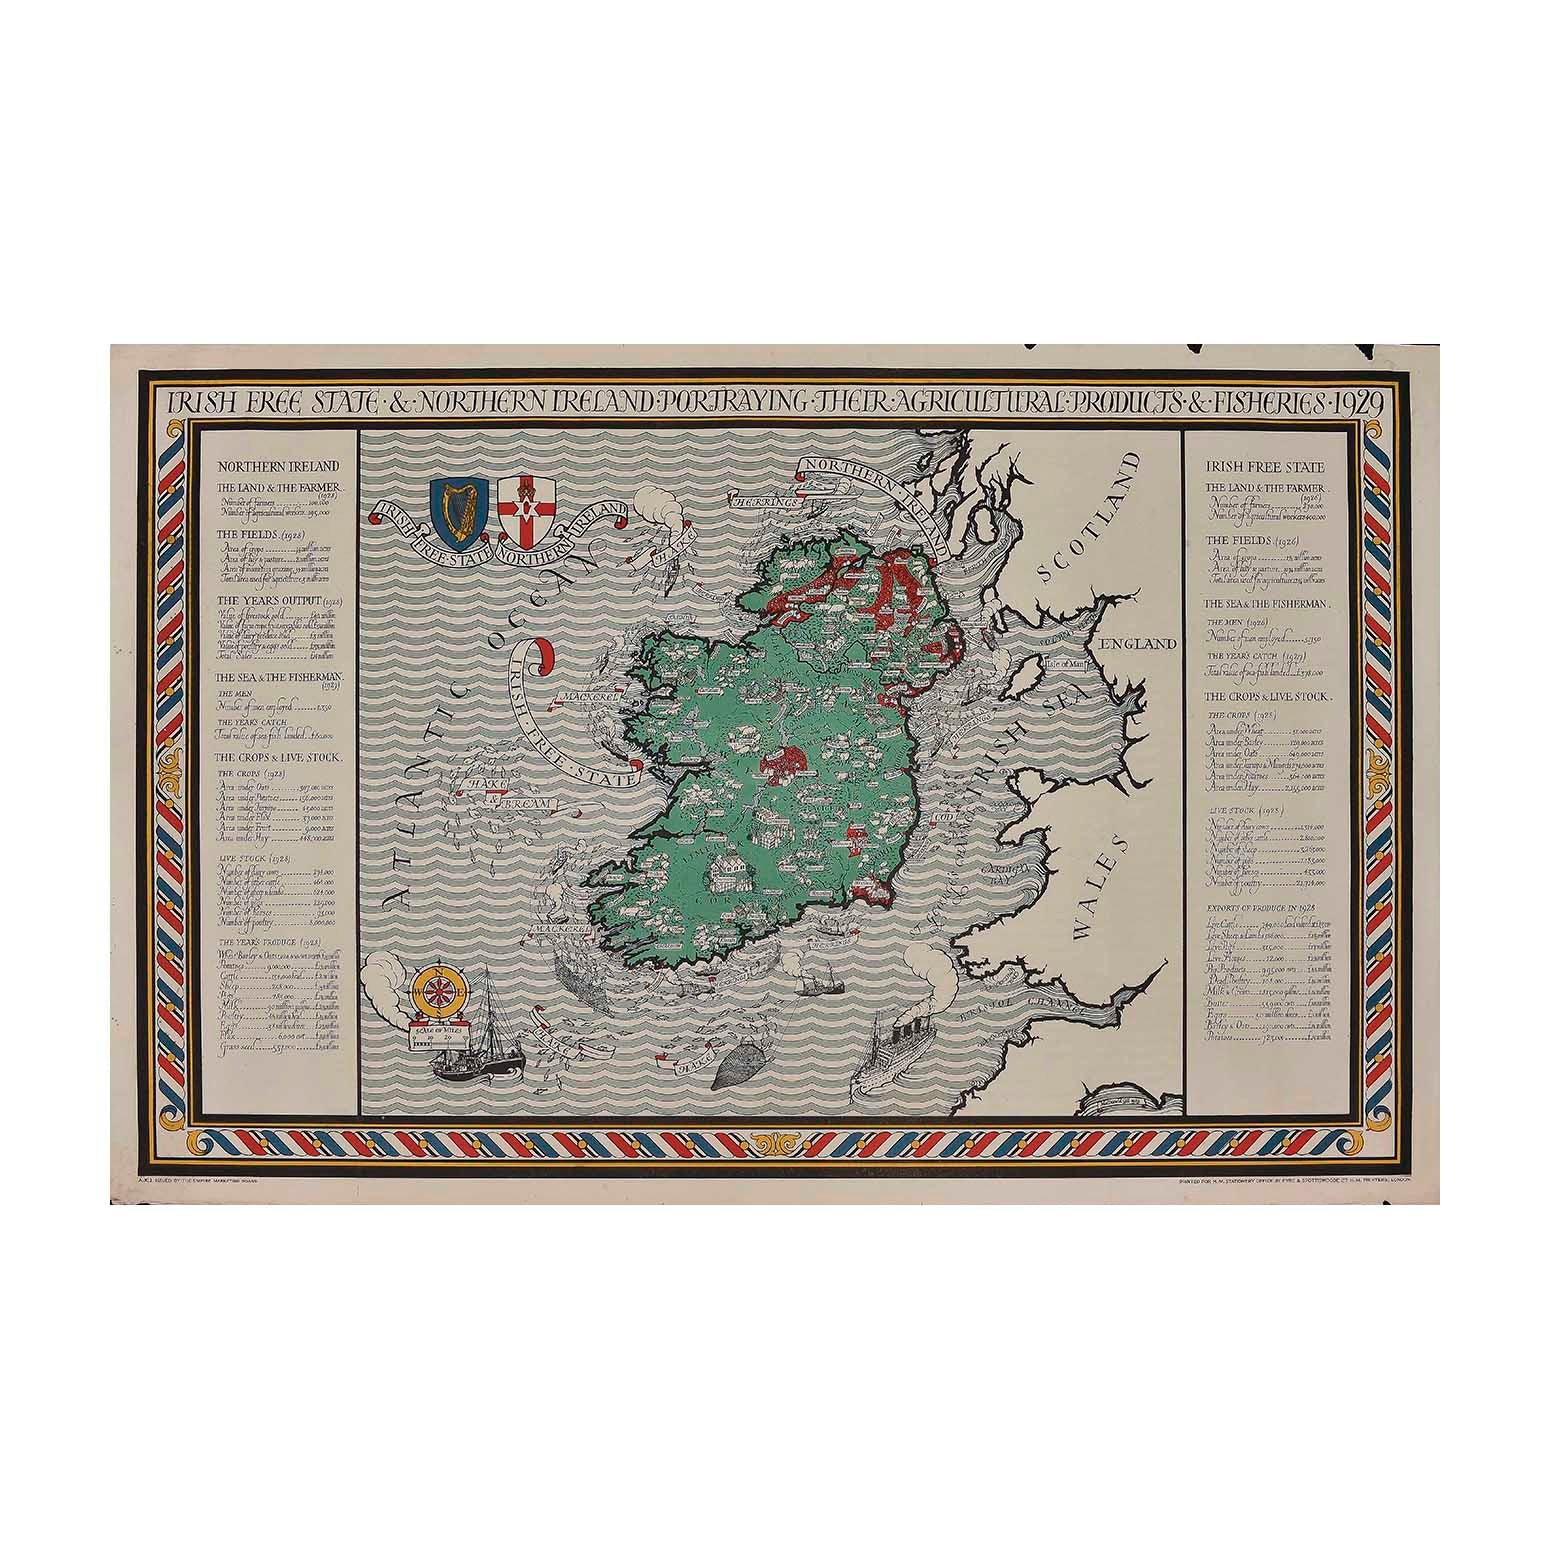 Original Empire Marketing Board poster map designed by Leslie MacDonald ('Max') Gill, 1929, showing Northern Ireland & The Irish Free State with towns, produce and places of interest marked